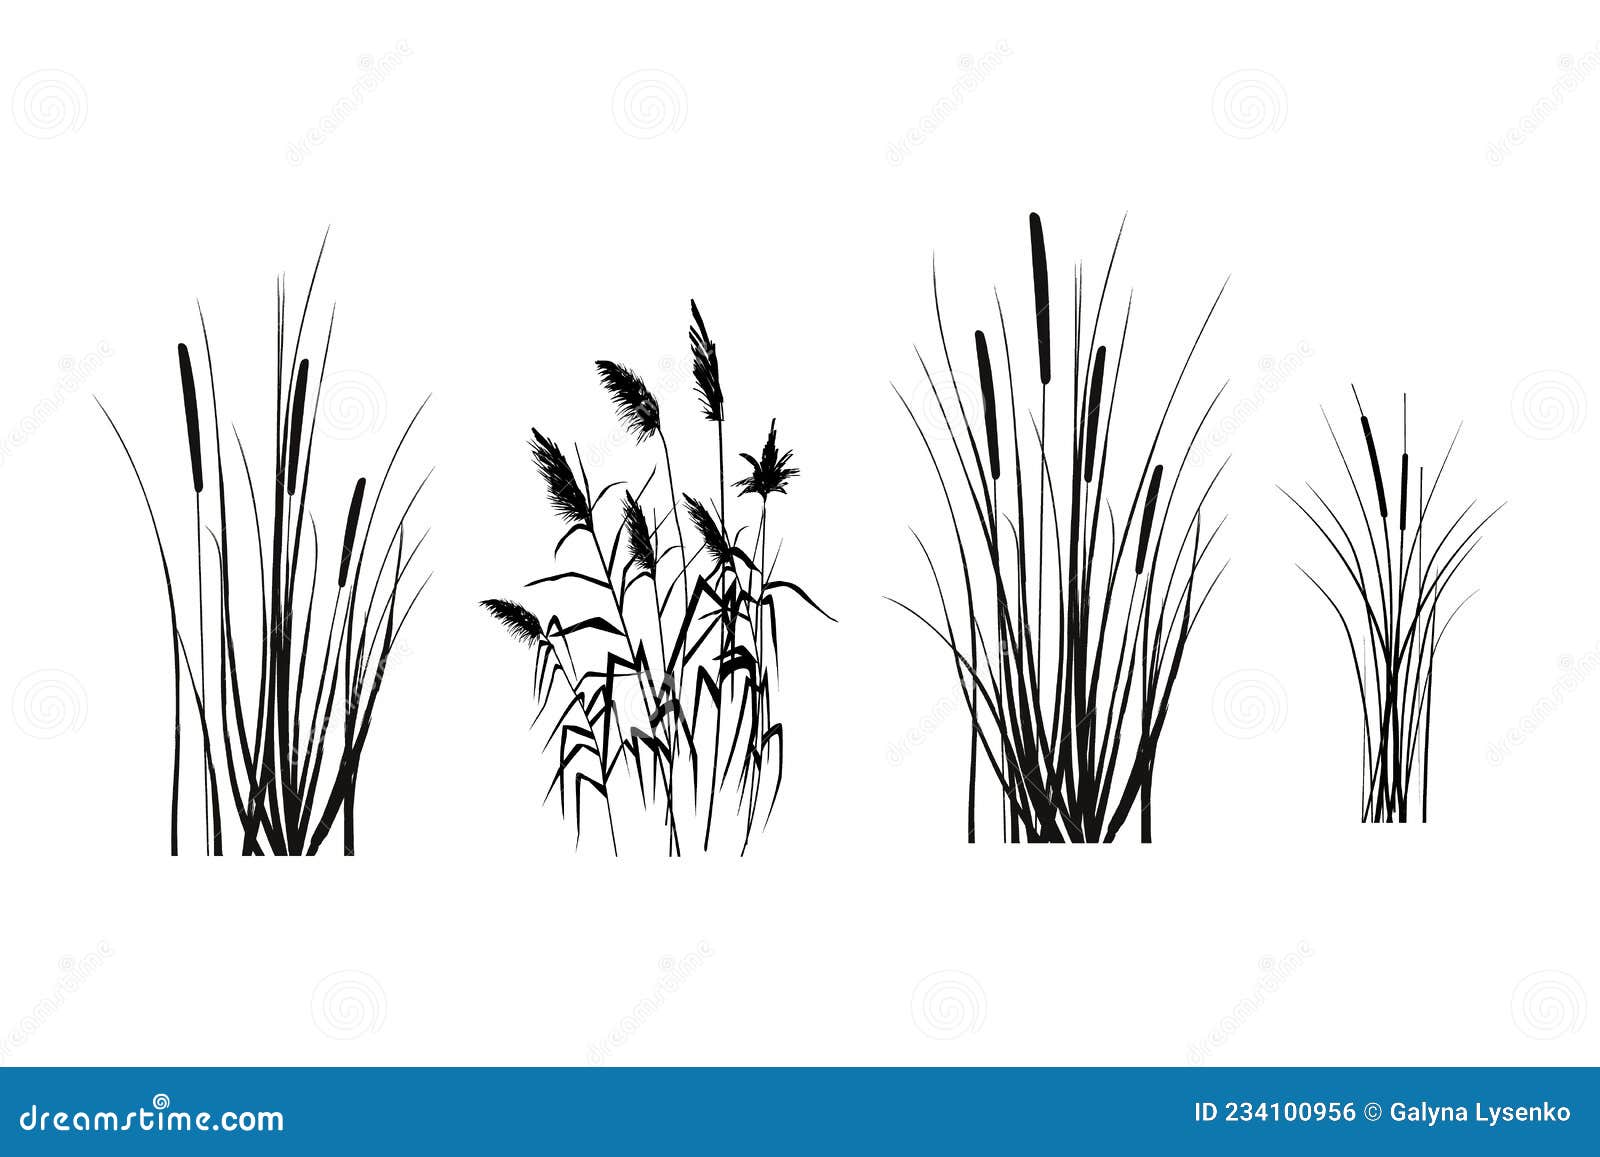 Vector Hand Drawing Sketch with Reeds. Stock Vector - Illustration of ...